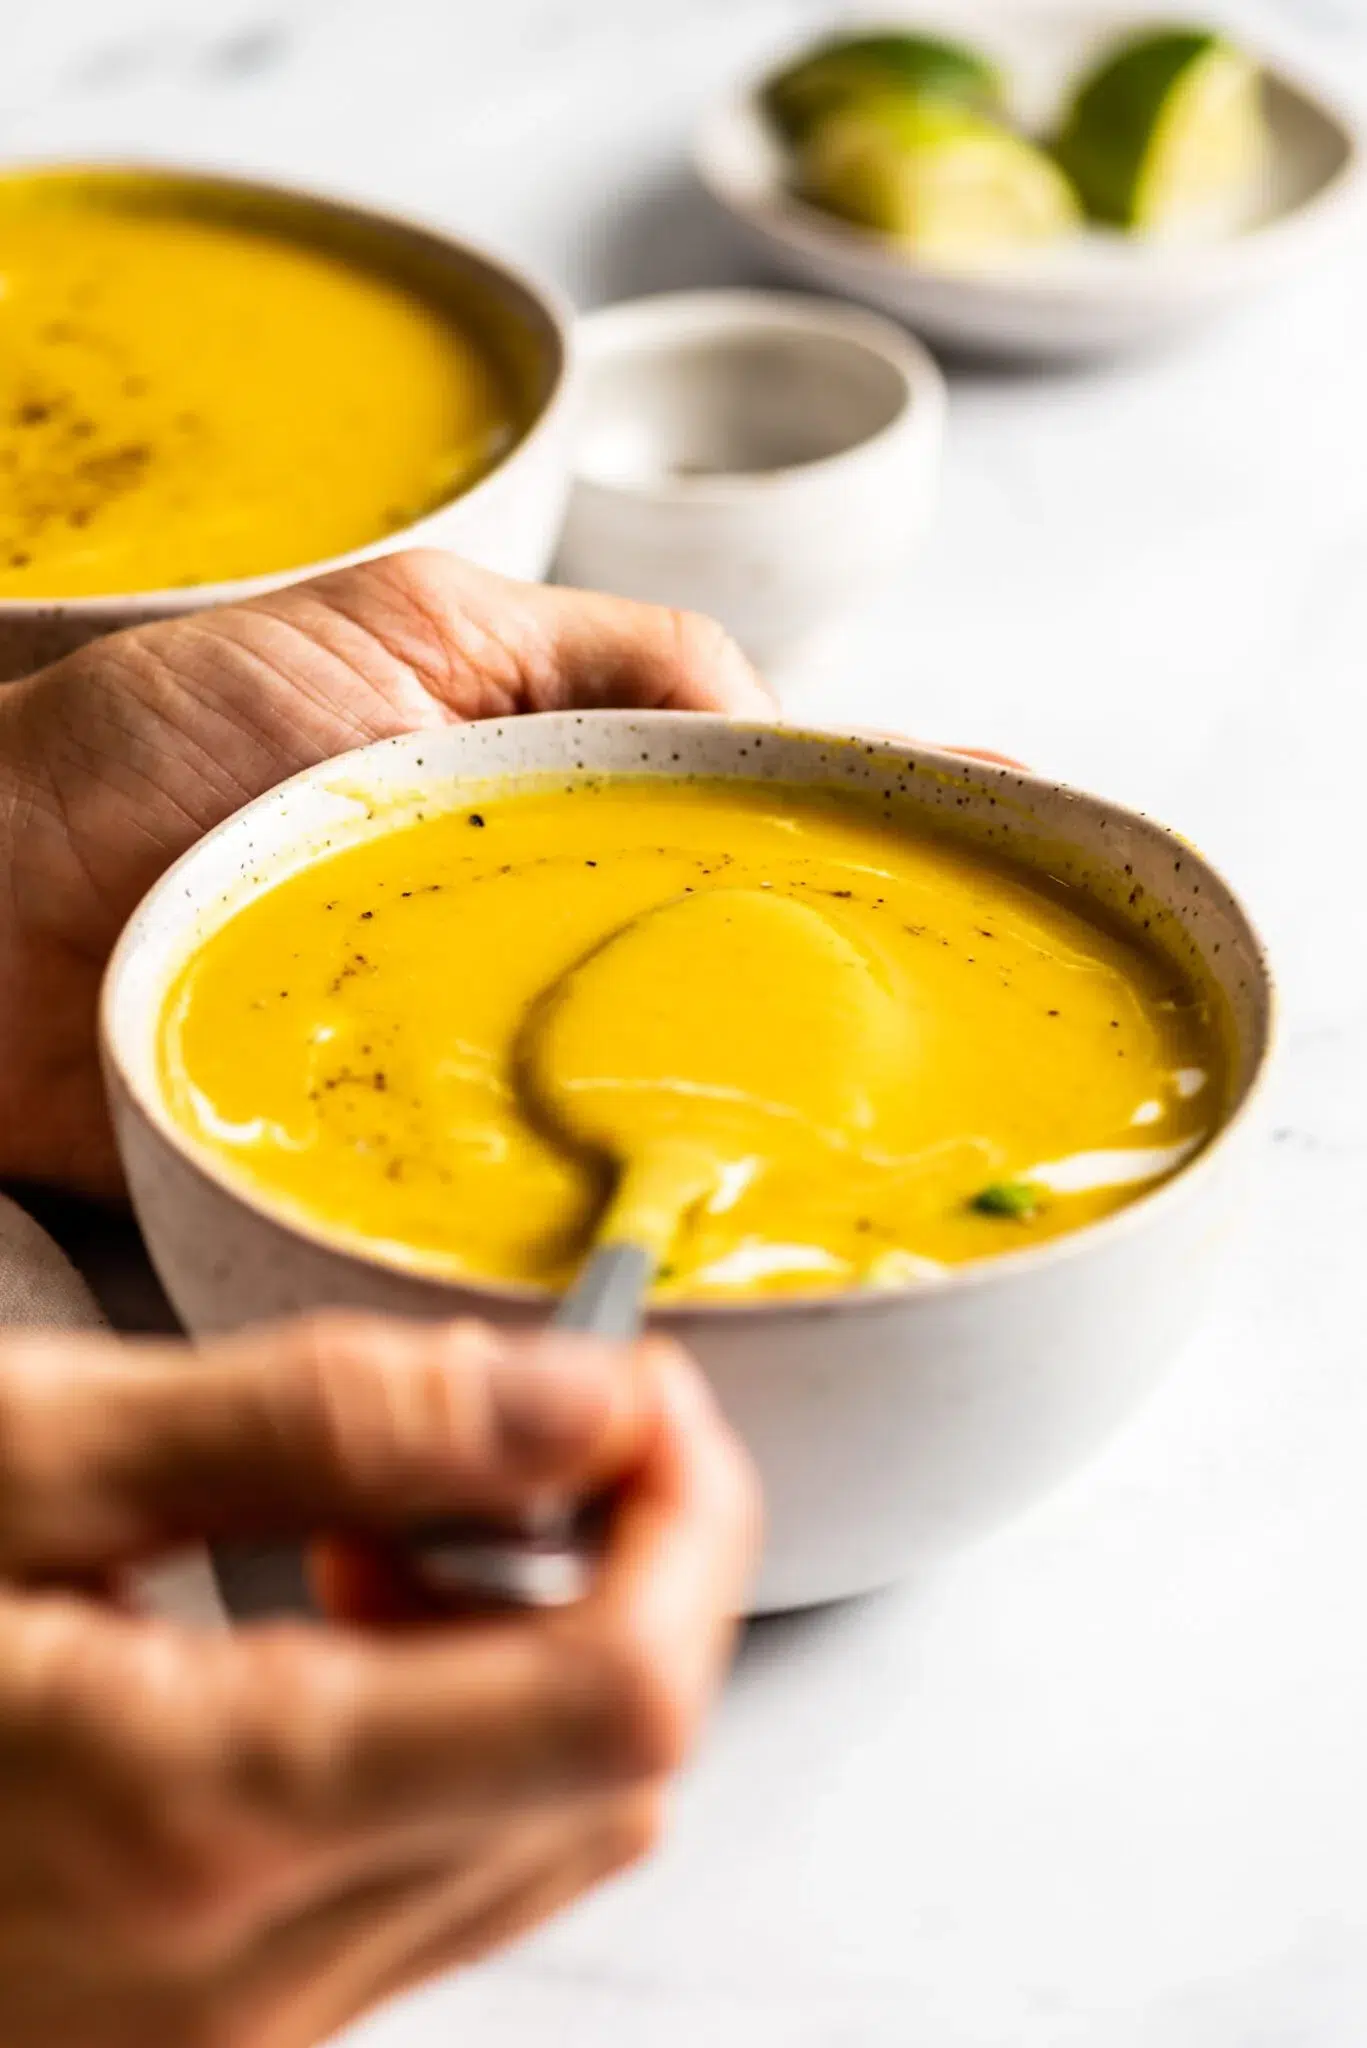 Close-up of a hand holding a bowl of creamy vegan pumpkin soup with a spoon, another bowl, and lime wedges in the background.